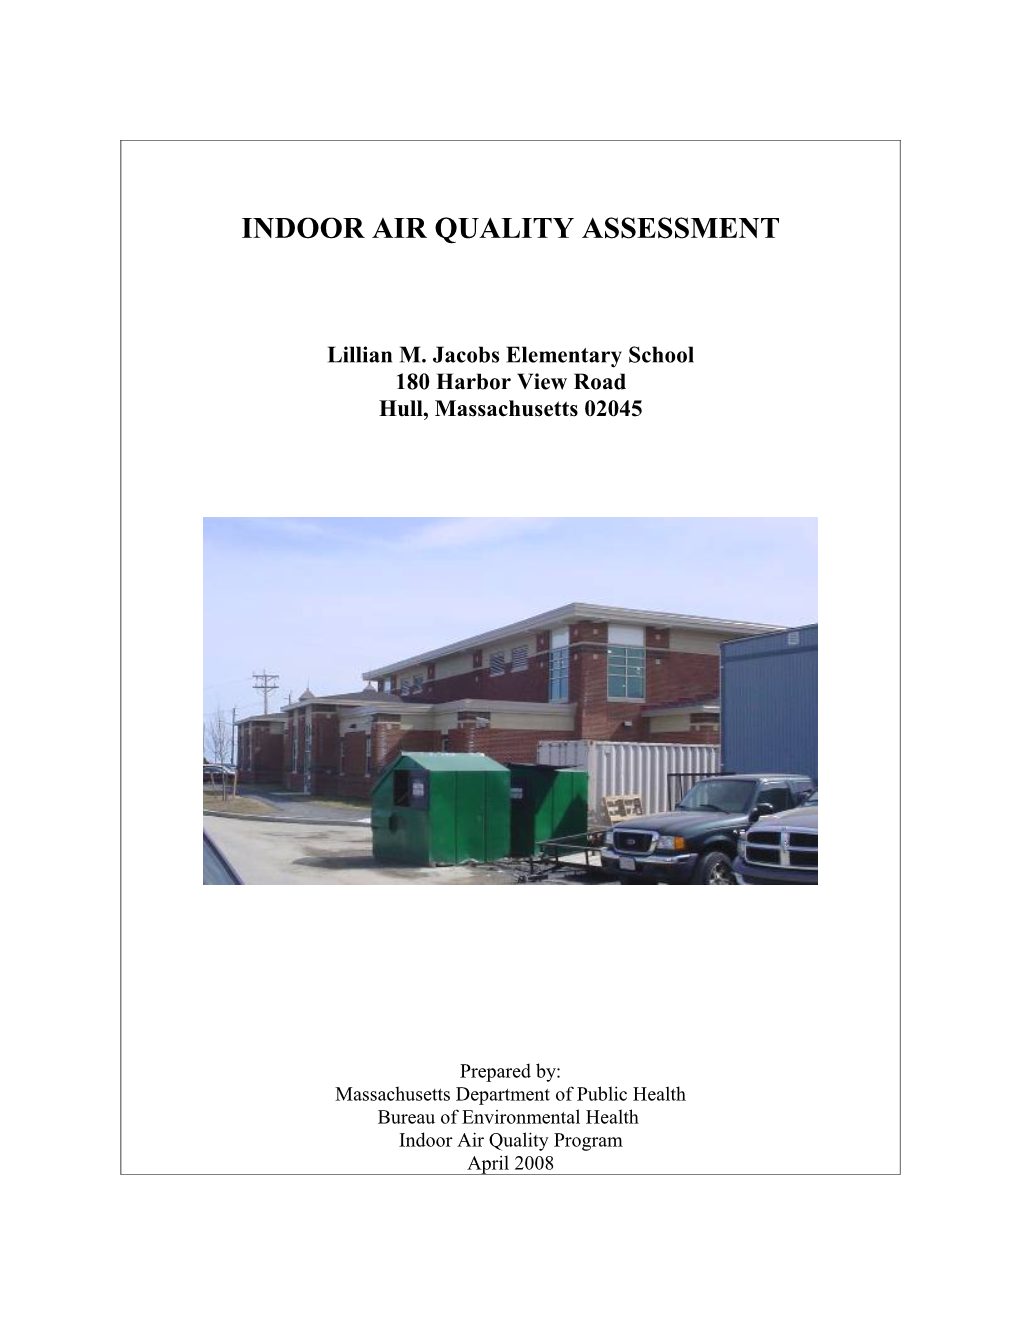 1. the Anonymous Complaint Alledgedpossible Carbon Monoxide Contamination in the School